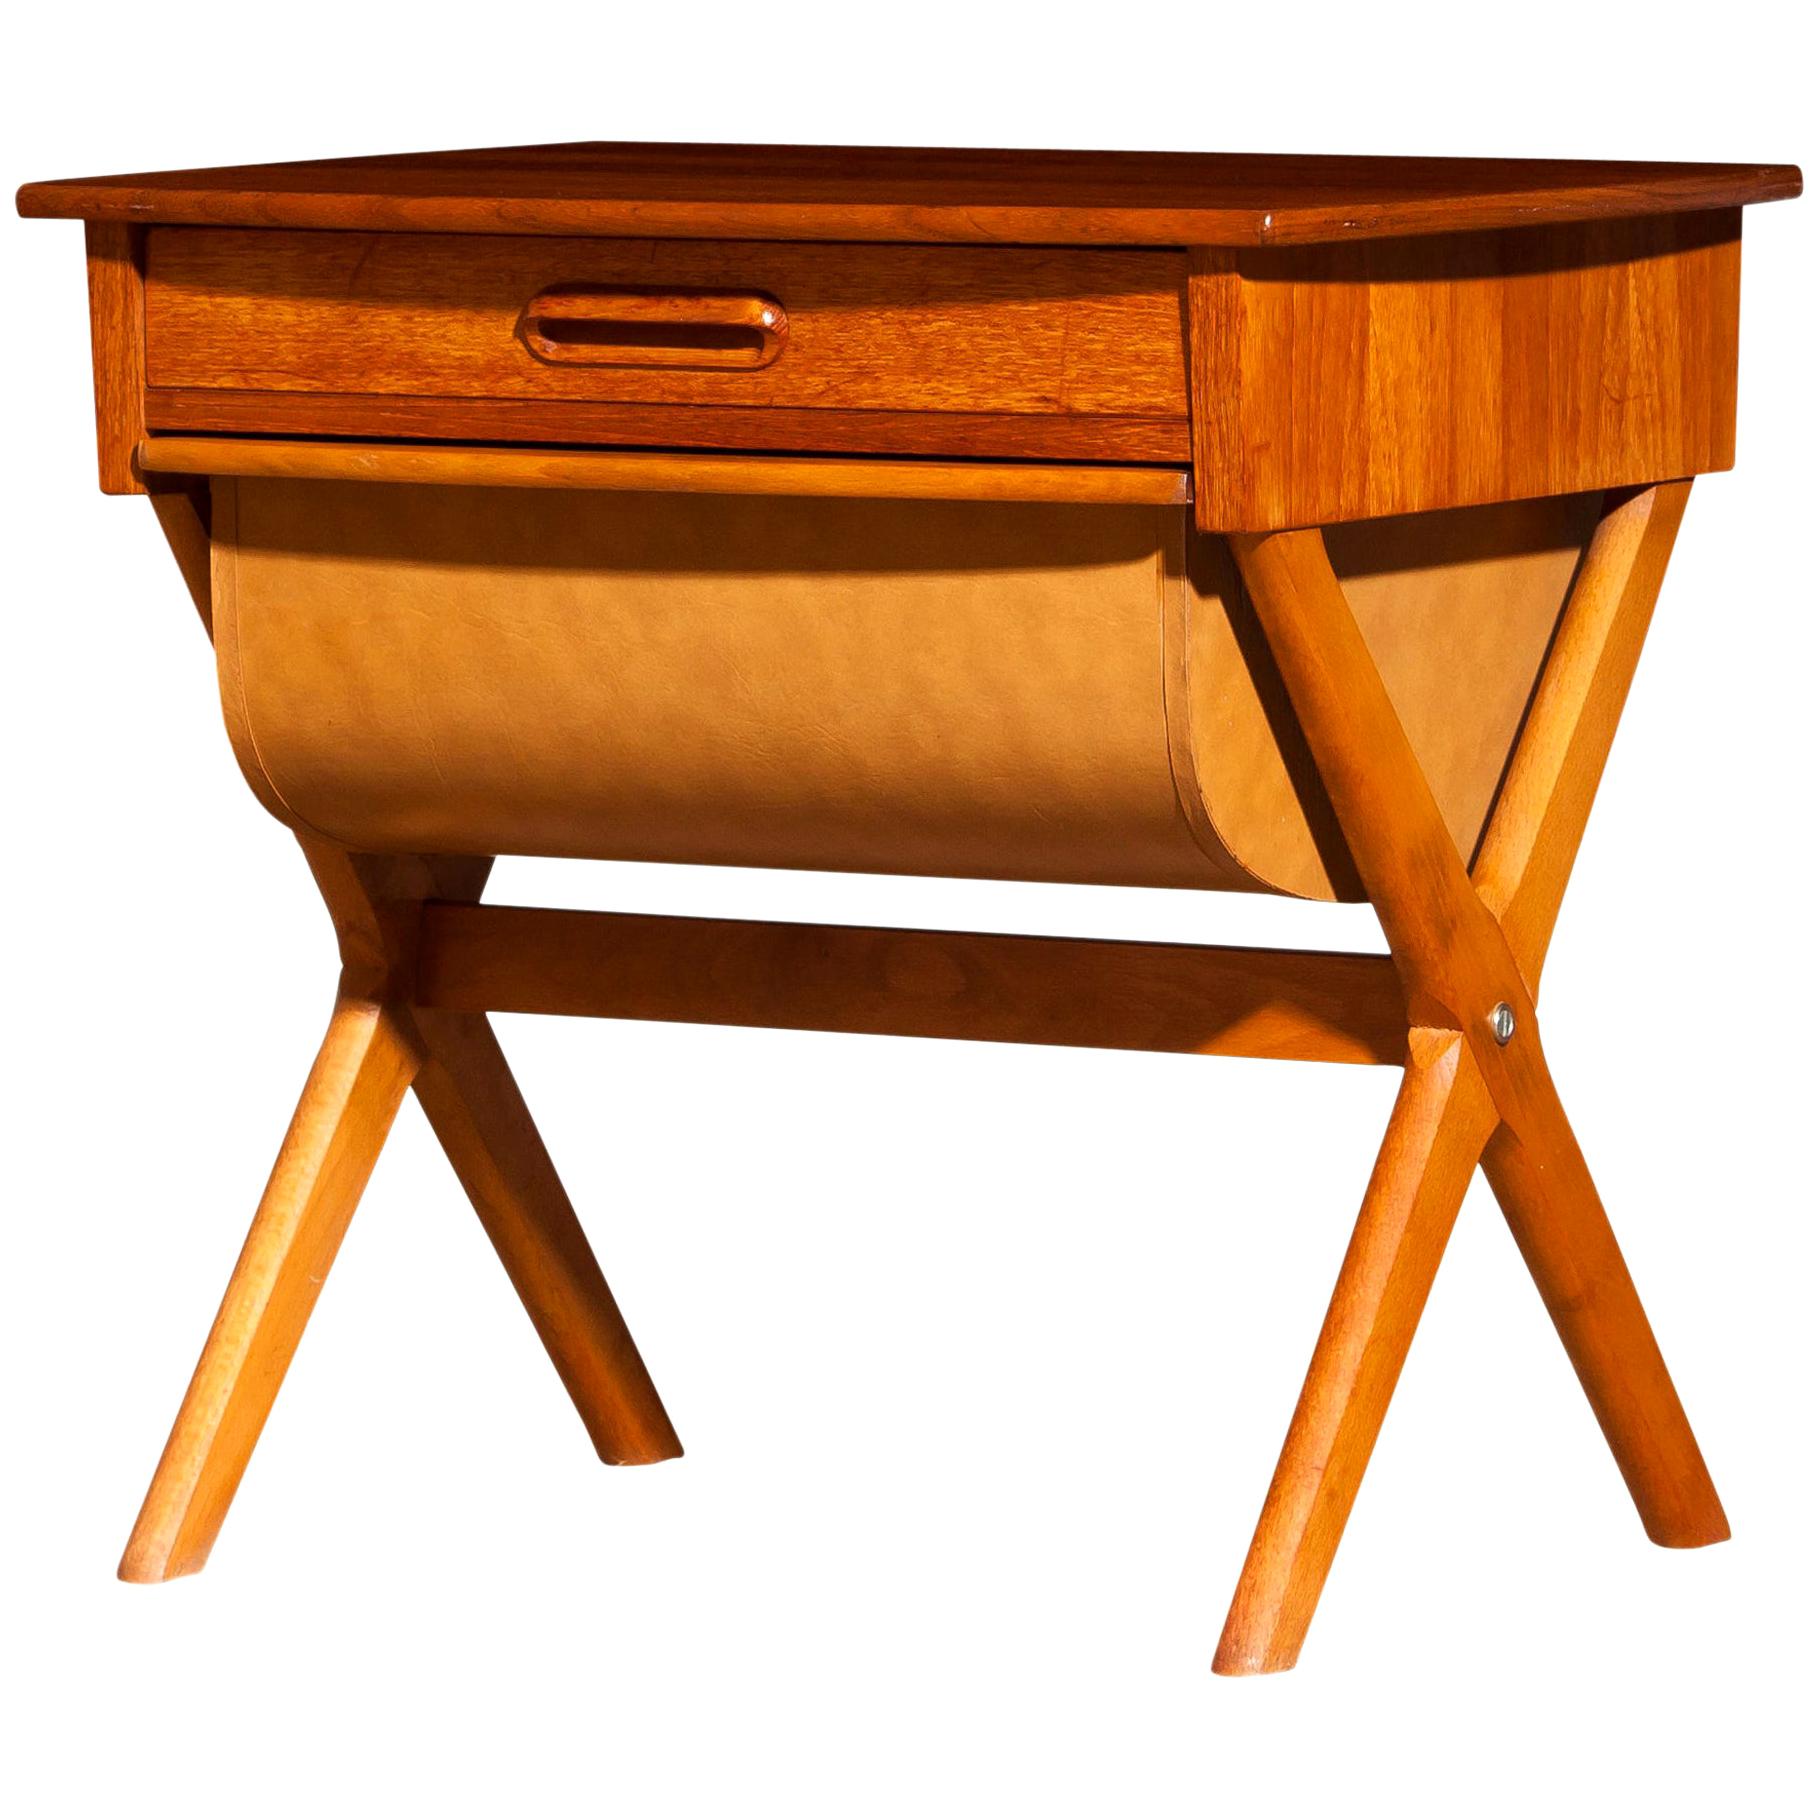 Mid-Century Modern 1960s, Teak Sewing, Side Table from Sweden